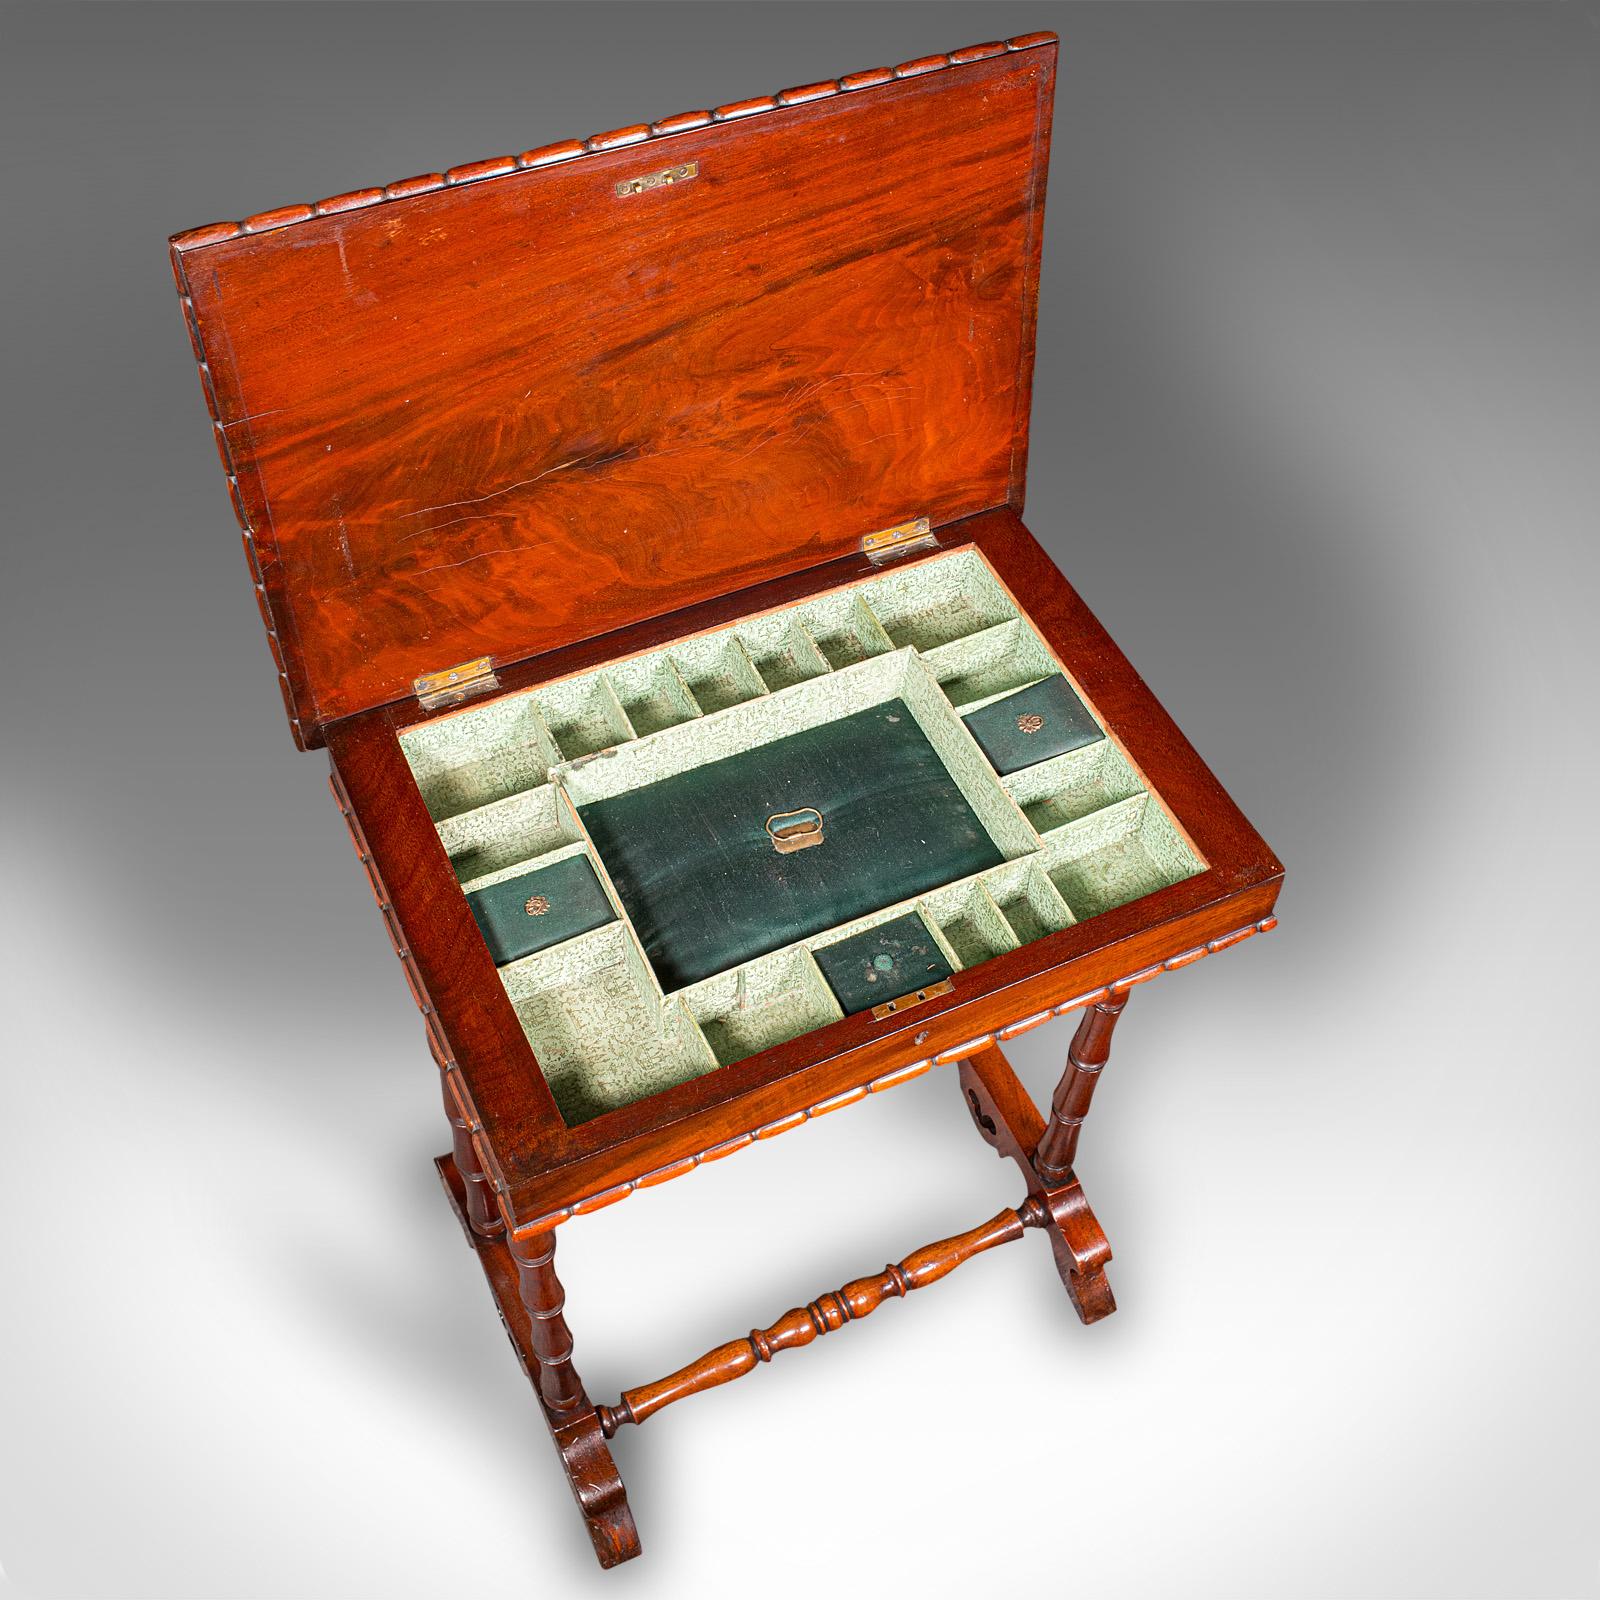 Wood Small Antique Sewing Table, English, Flame, Ladies, Work, Regency, Circa 1830 For Sale